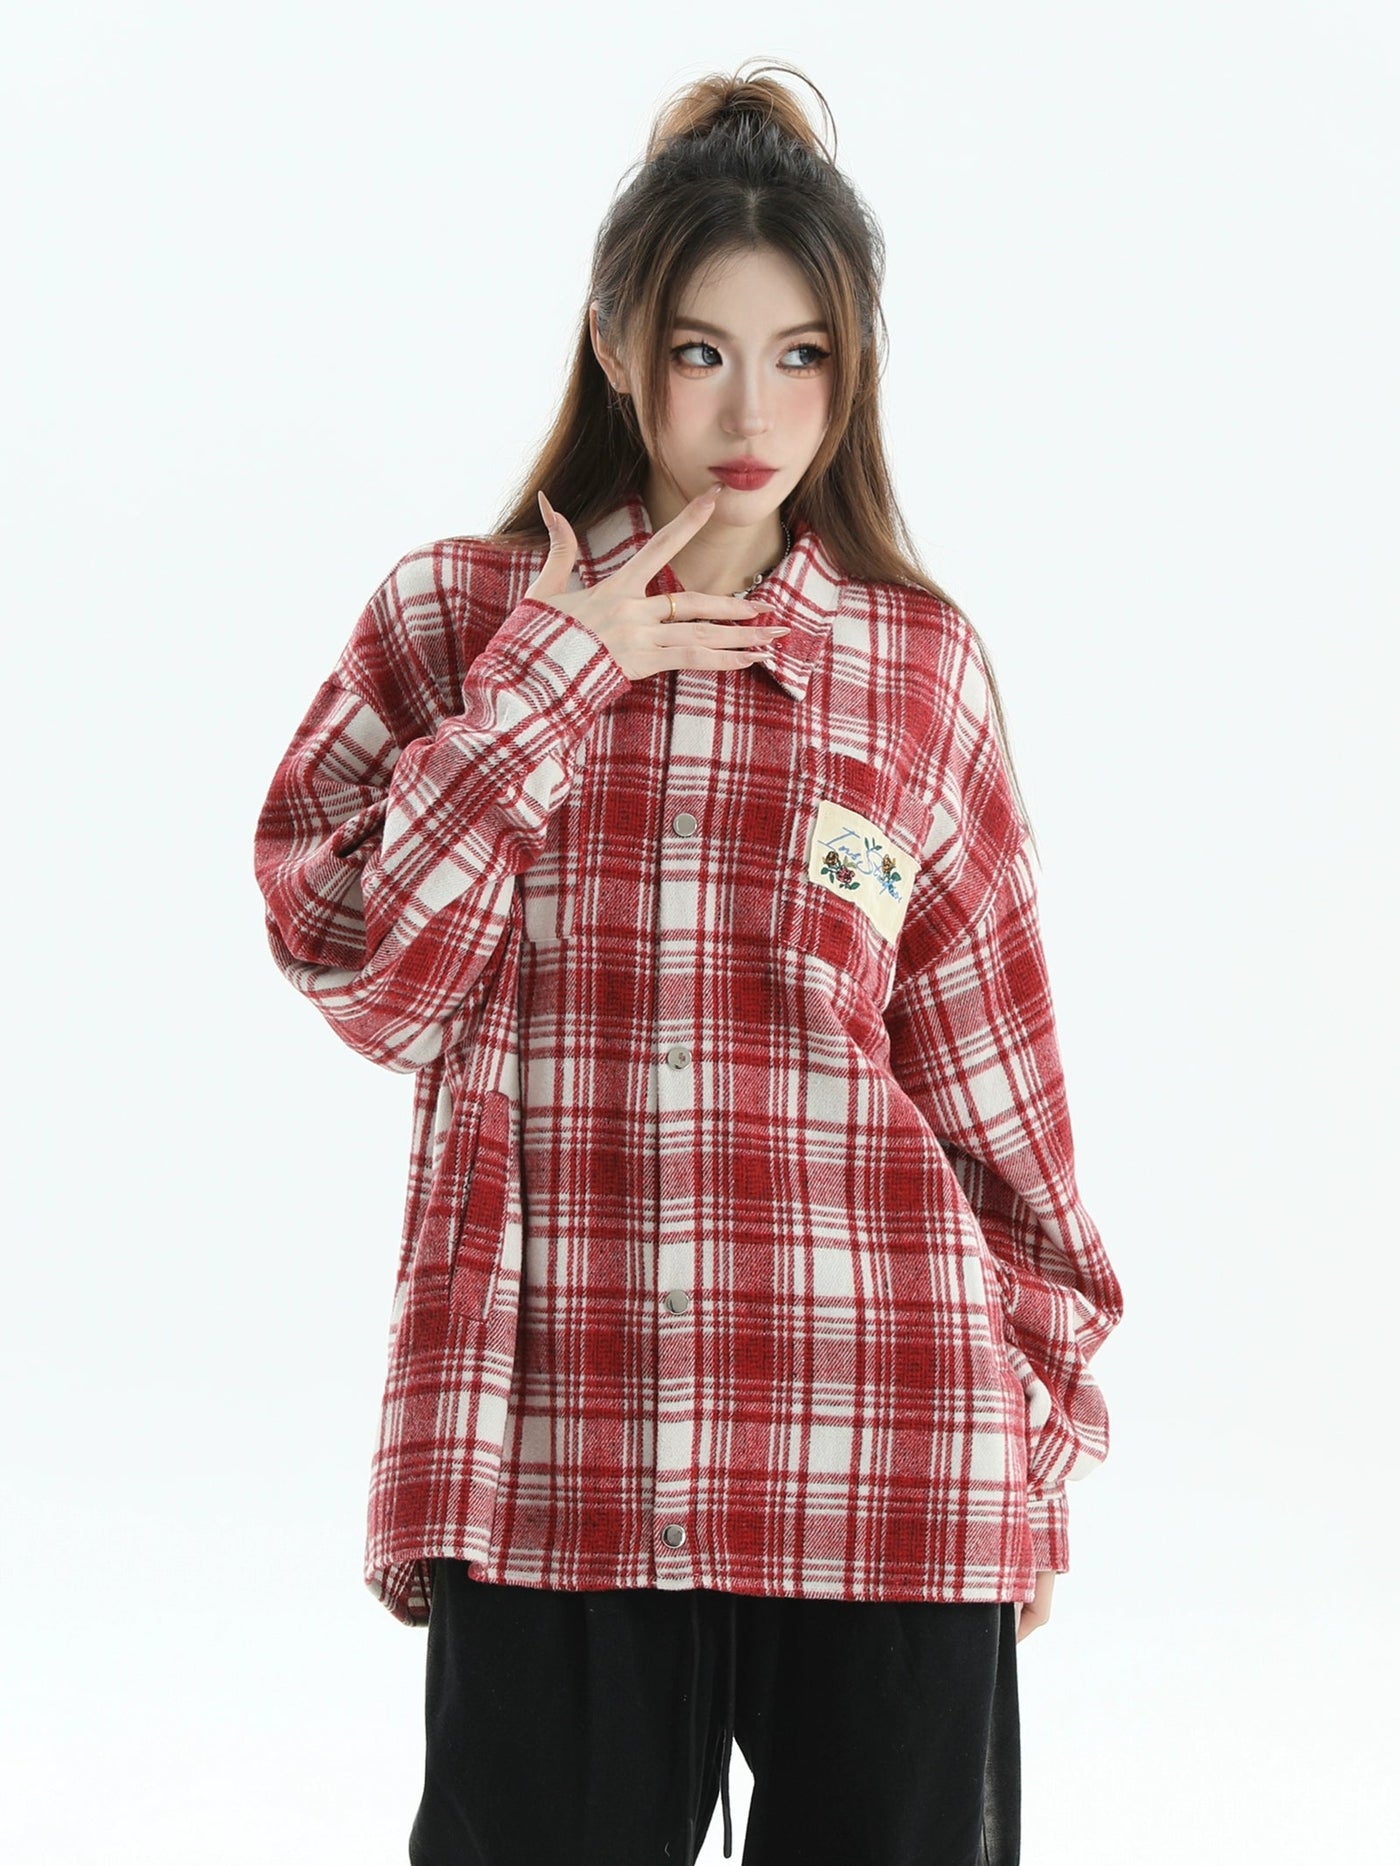 Patched Plaid Comfty Shirt Korean Street Fashion Shirt By INS Korea Shop Online at OH Vault